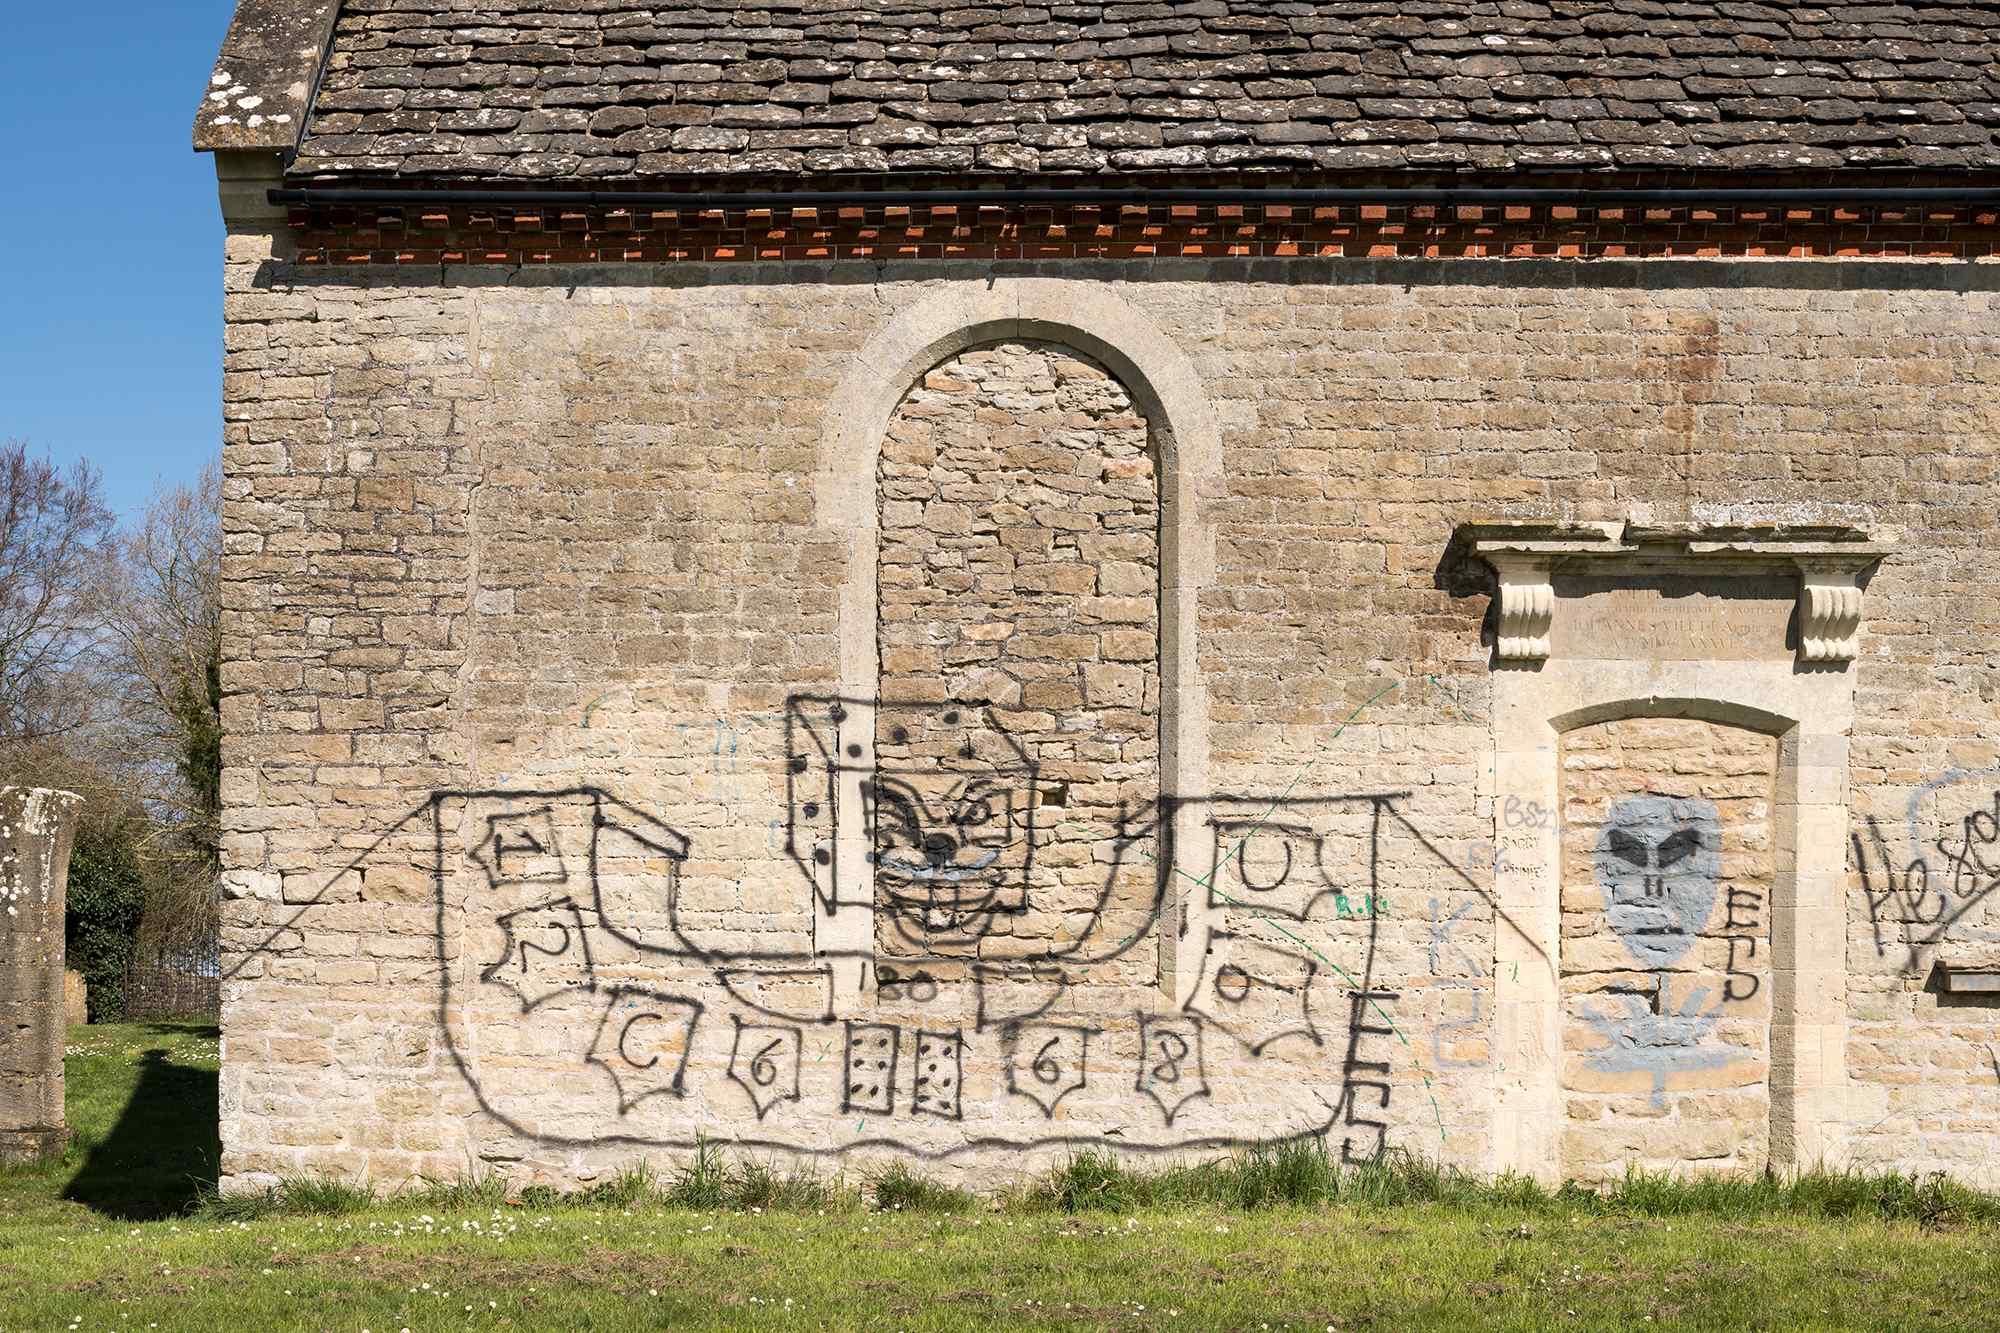 brick church building with graffiti, surrounded by grassland